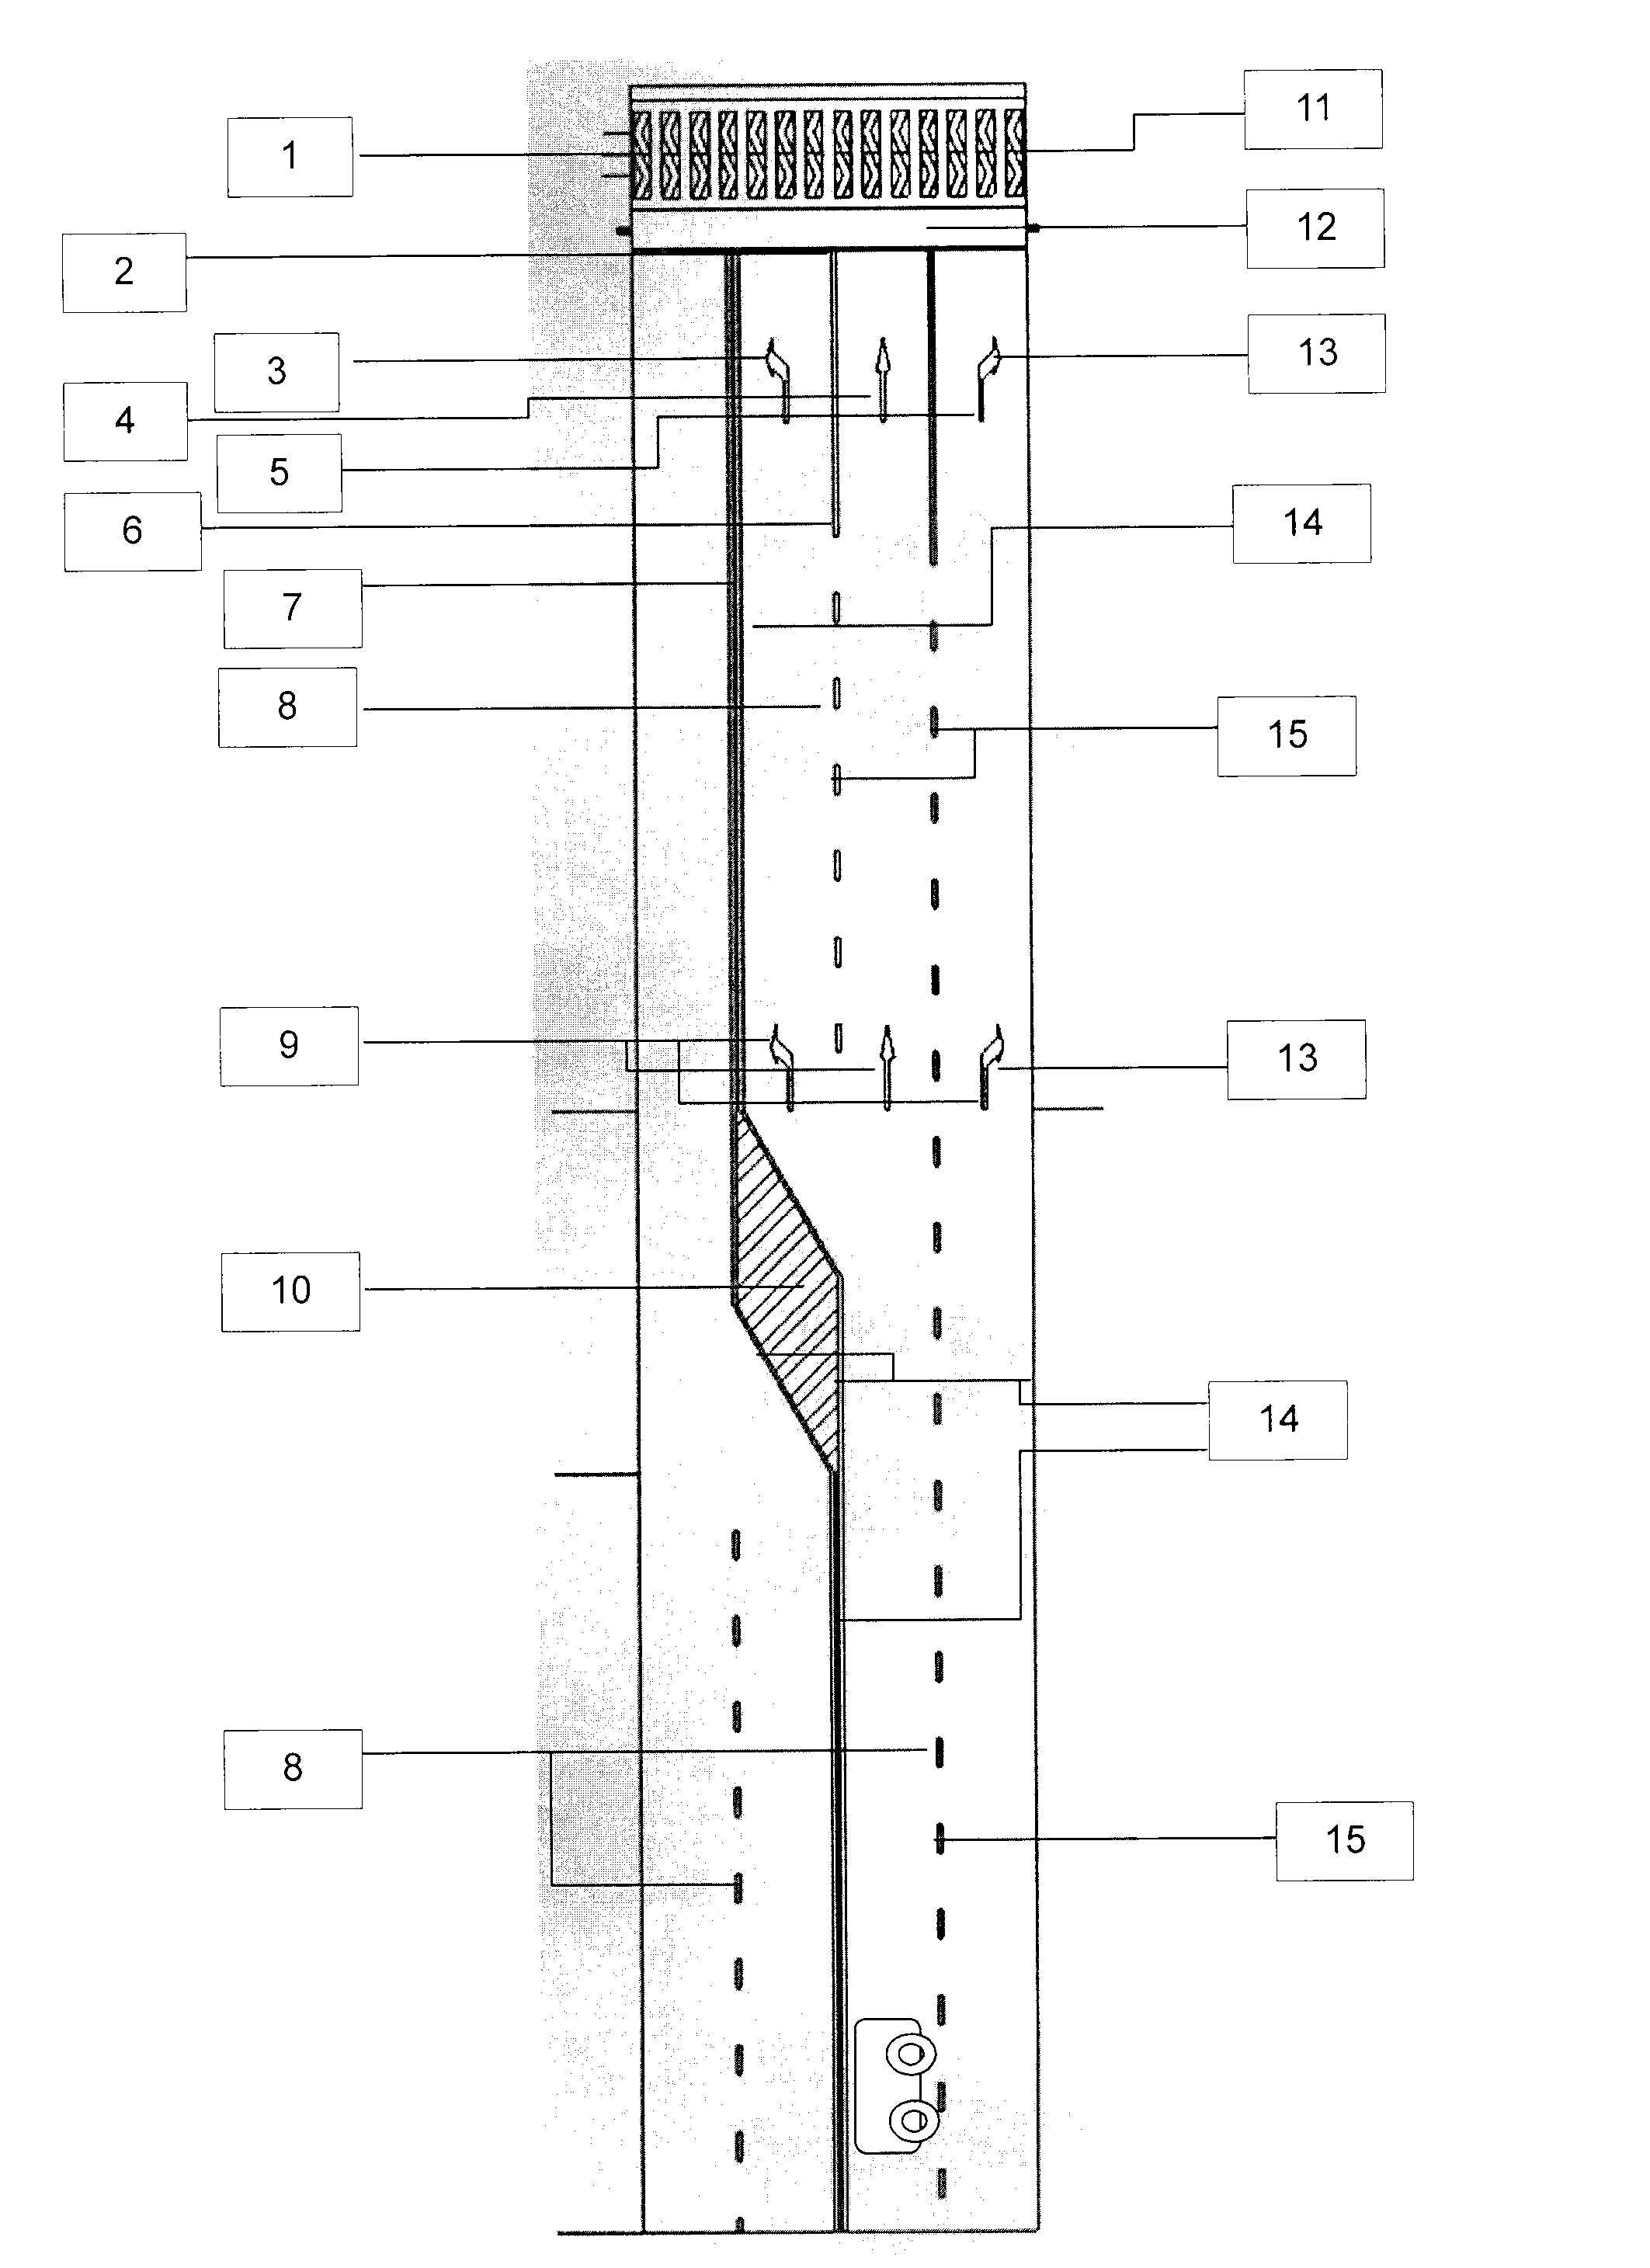 Night road surface light-emitting diode (LED) lamplight guiding system